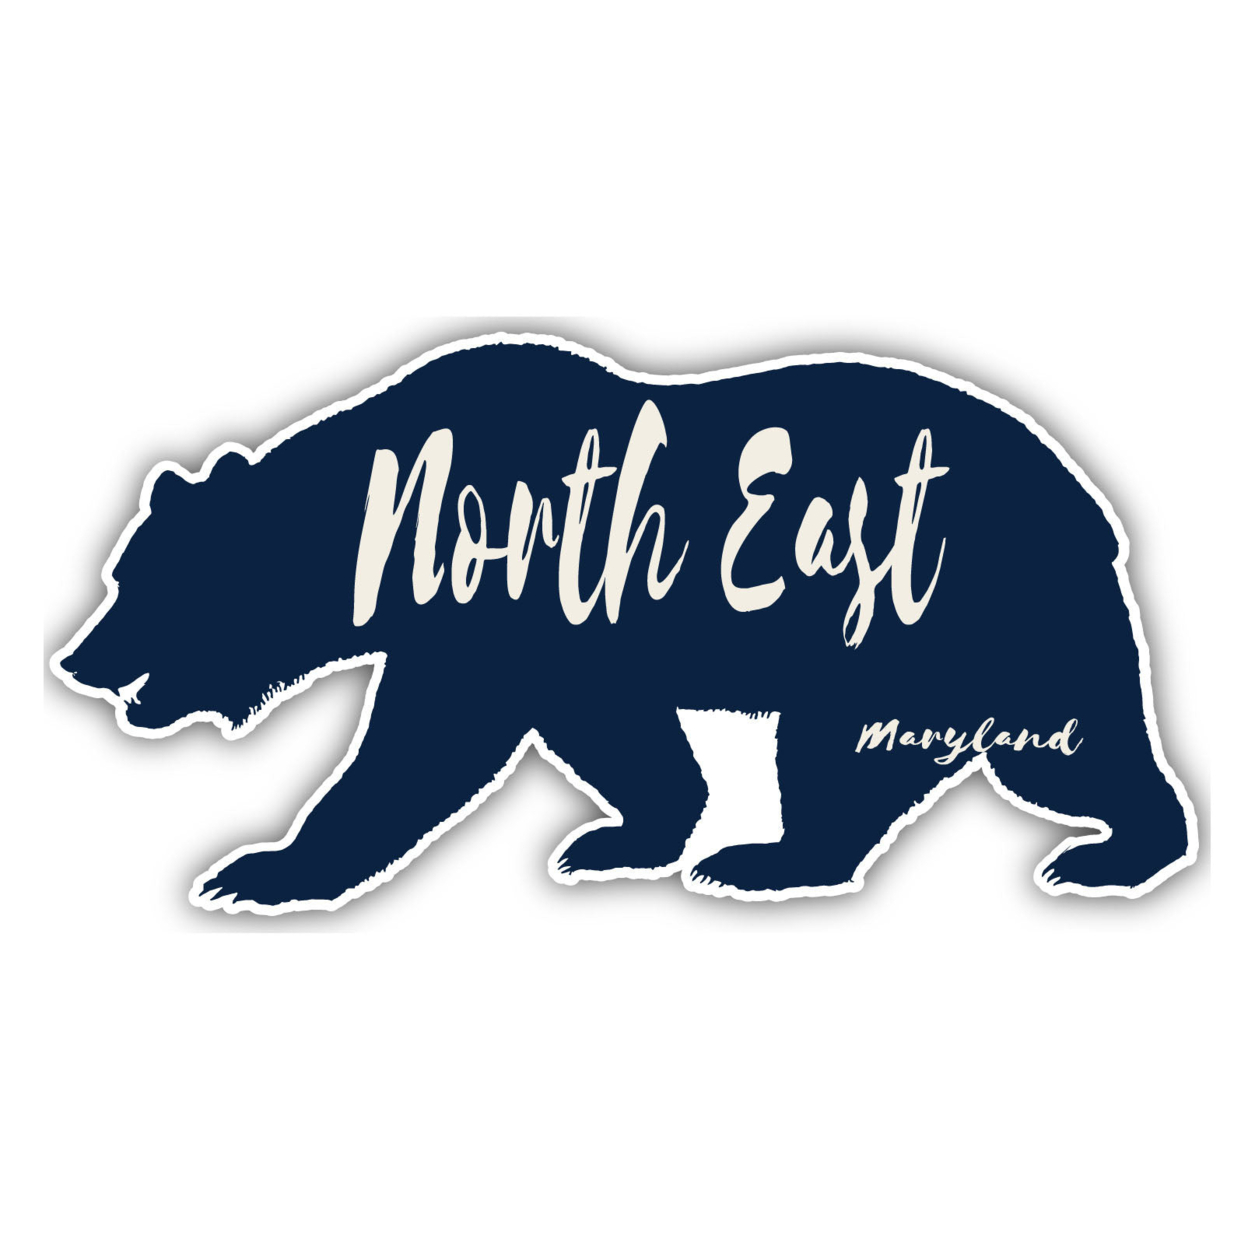 North East Maryland Souvenir Decorative Stickers (Choose Theme And Size) - Single Unit, 4-Inch, Bear